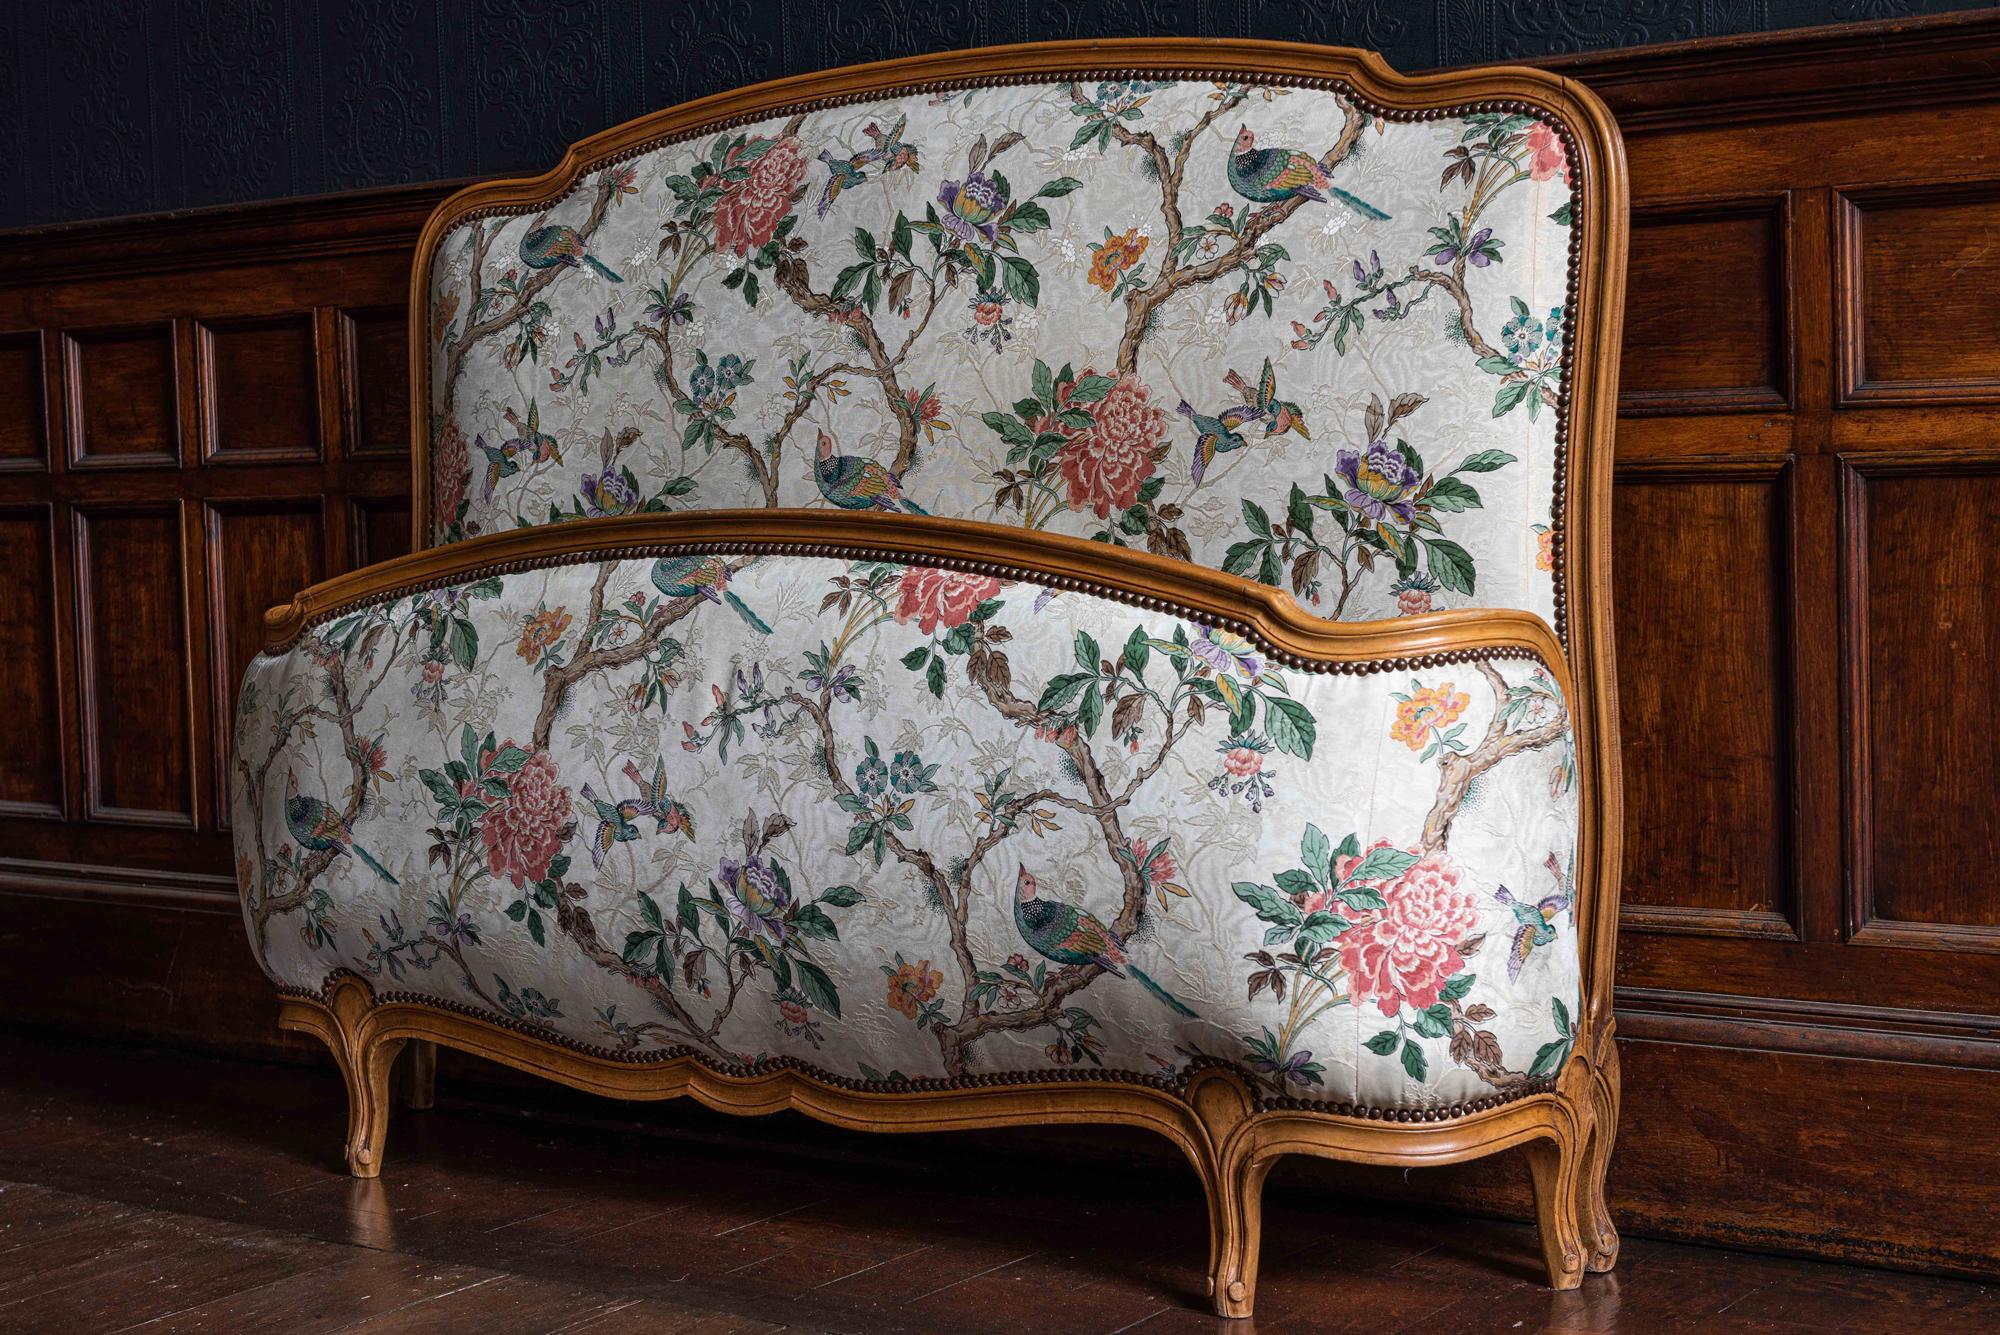 1930s French demi Corbeille double bed with decorative upholstery
The decorative nature inspired upholstery with birds and blossom branches is in very good condition showing minor signs of wear.

Measures: Internal 144 D x 190 W (180 to rail) 196